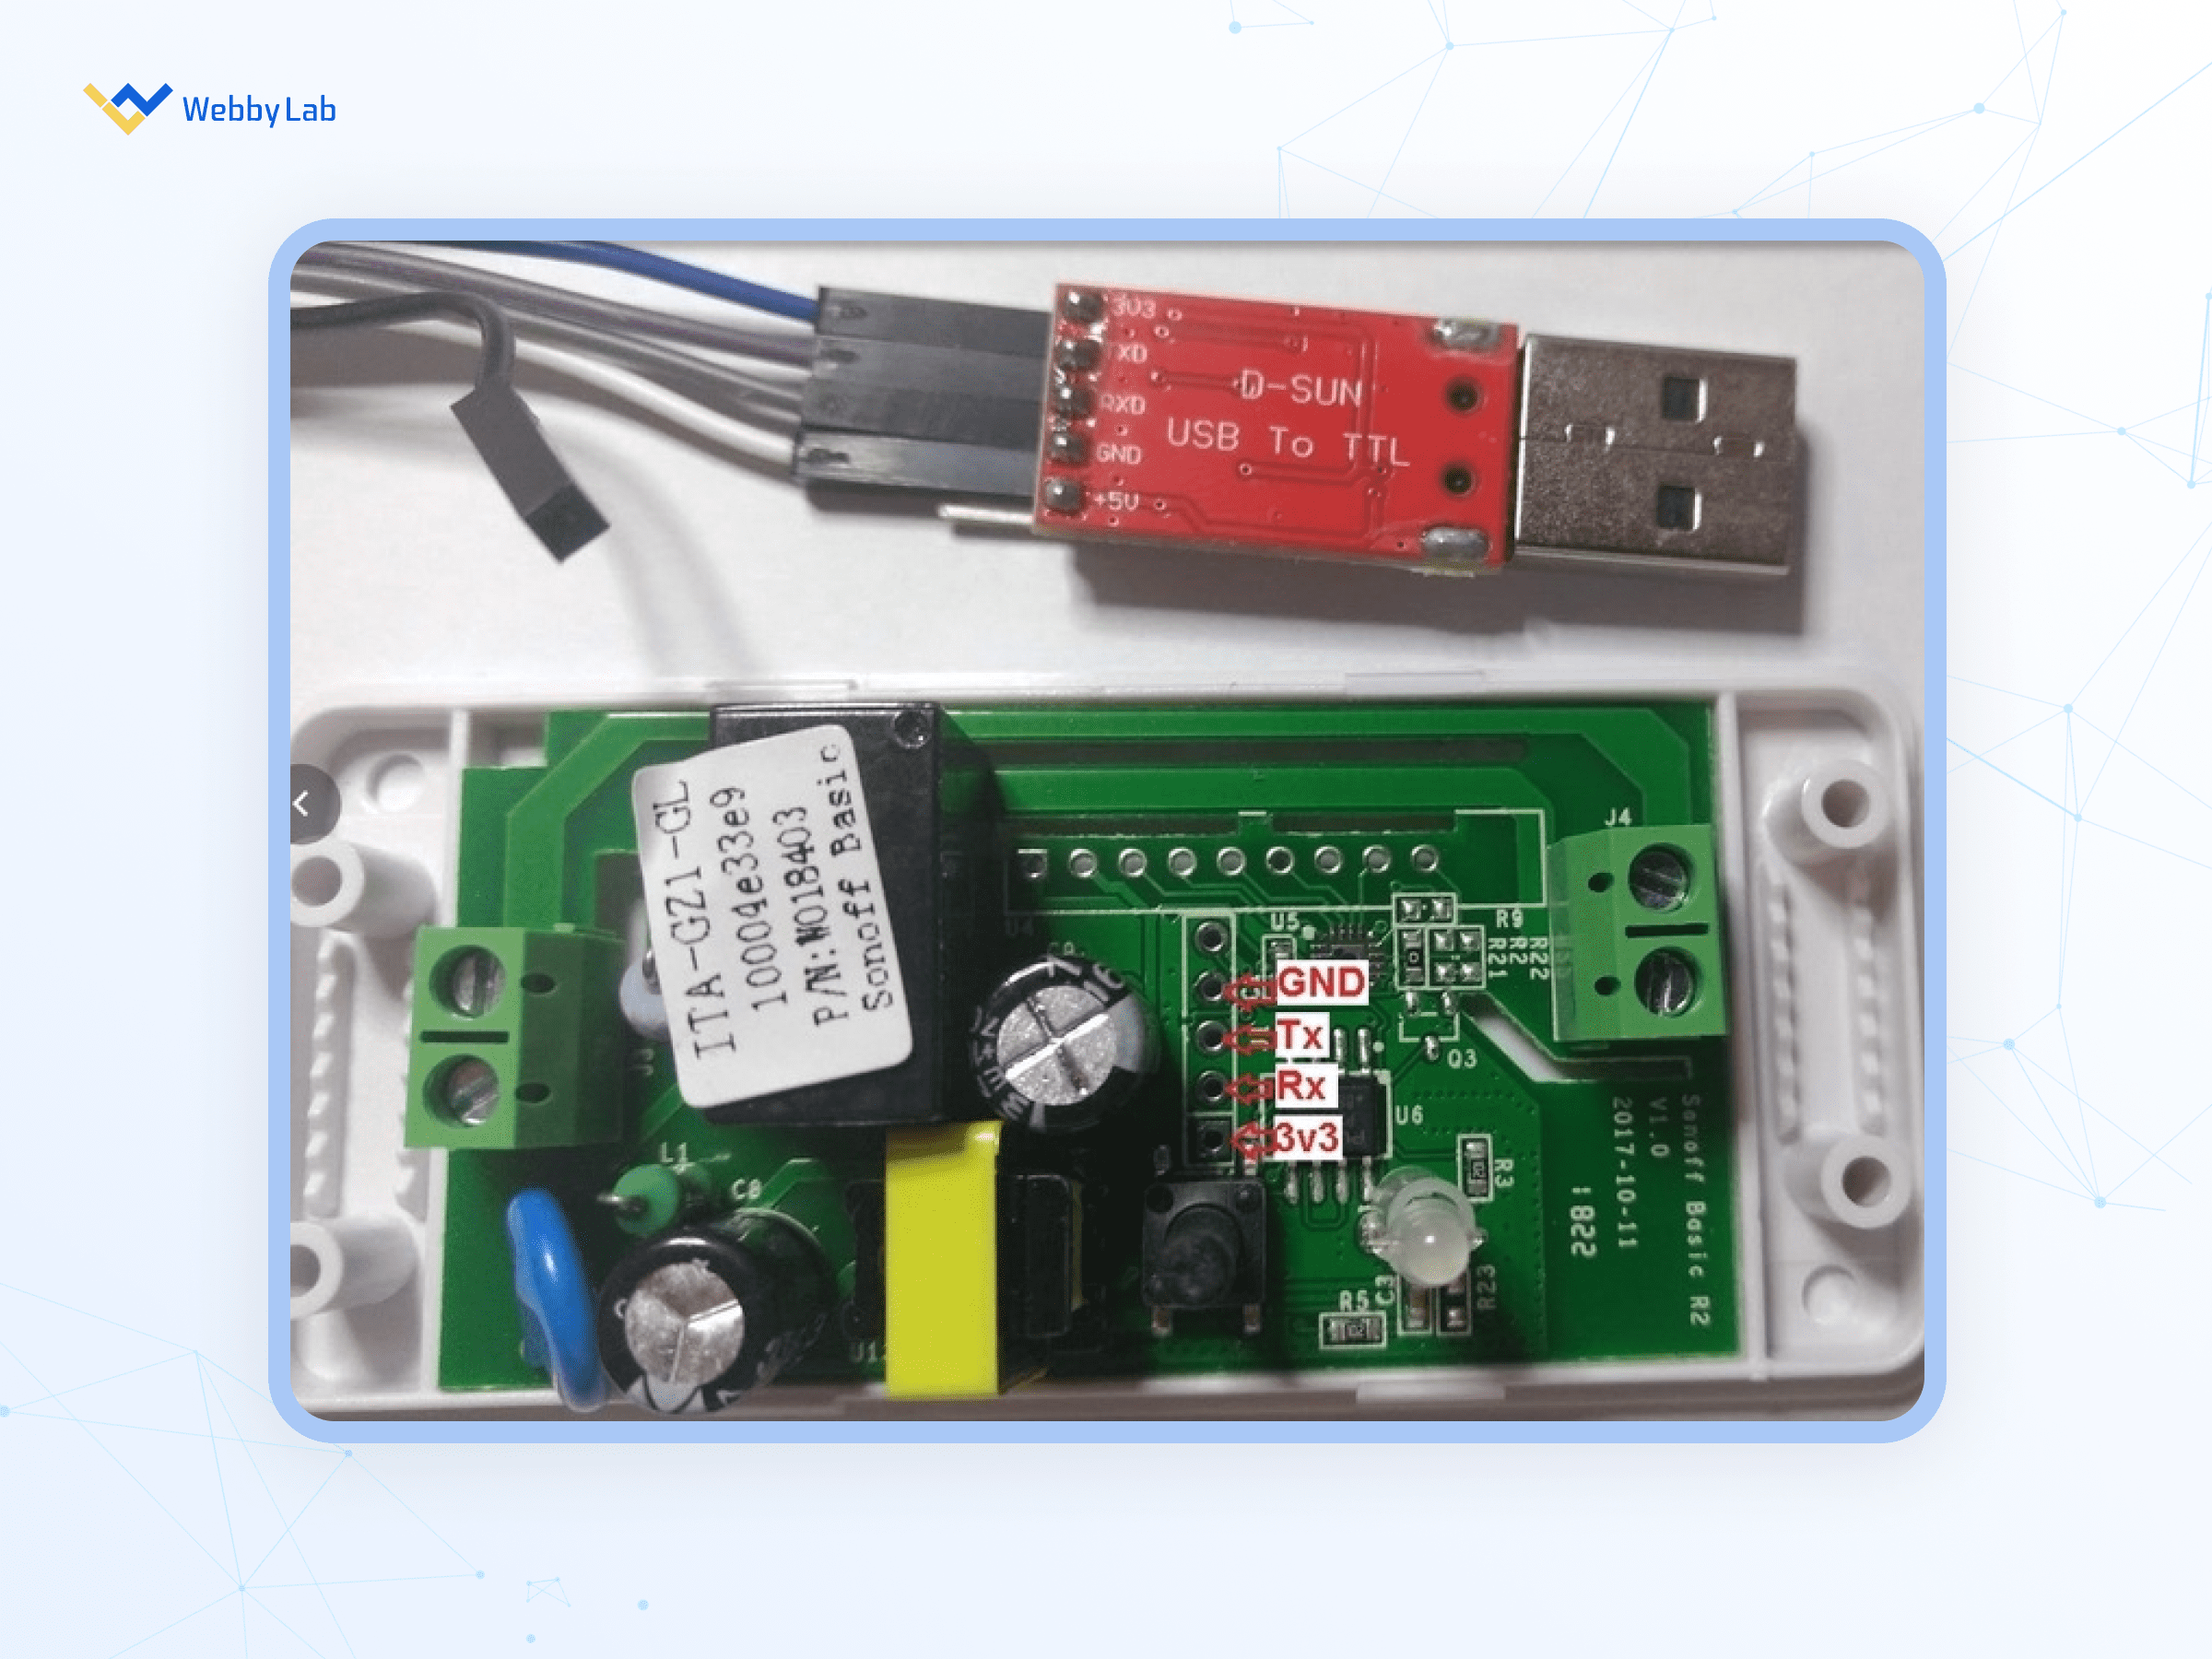  Connecting the Sonoff device to the computer with a USB-TTL converter. 